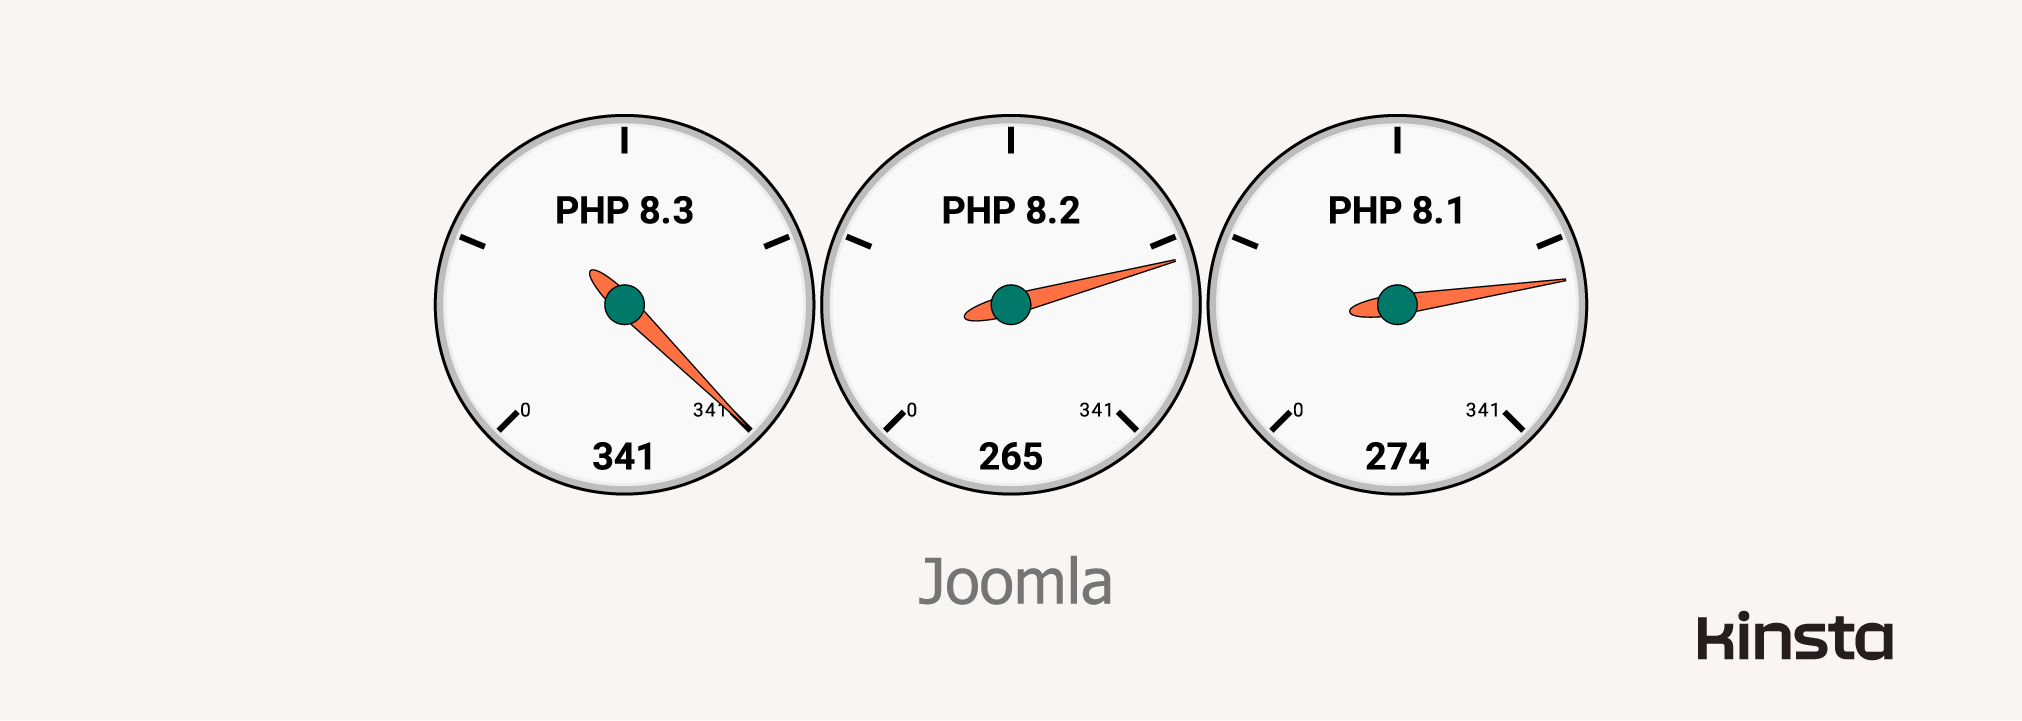 Joomla 4.3.3 performance on PHP 8.1, 8.2, and 8.3 (in requests/second).